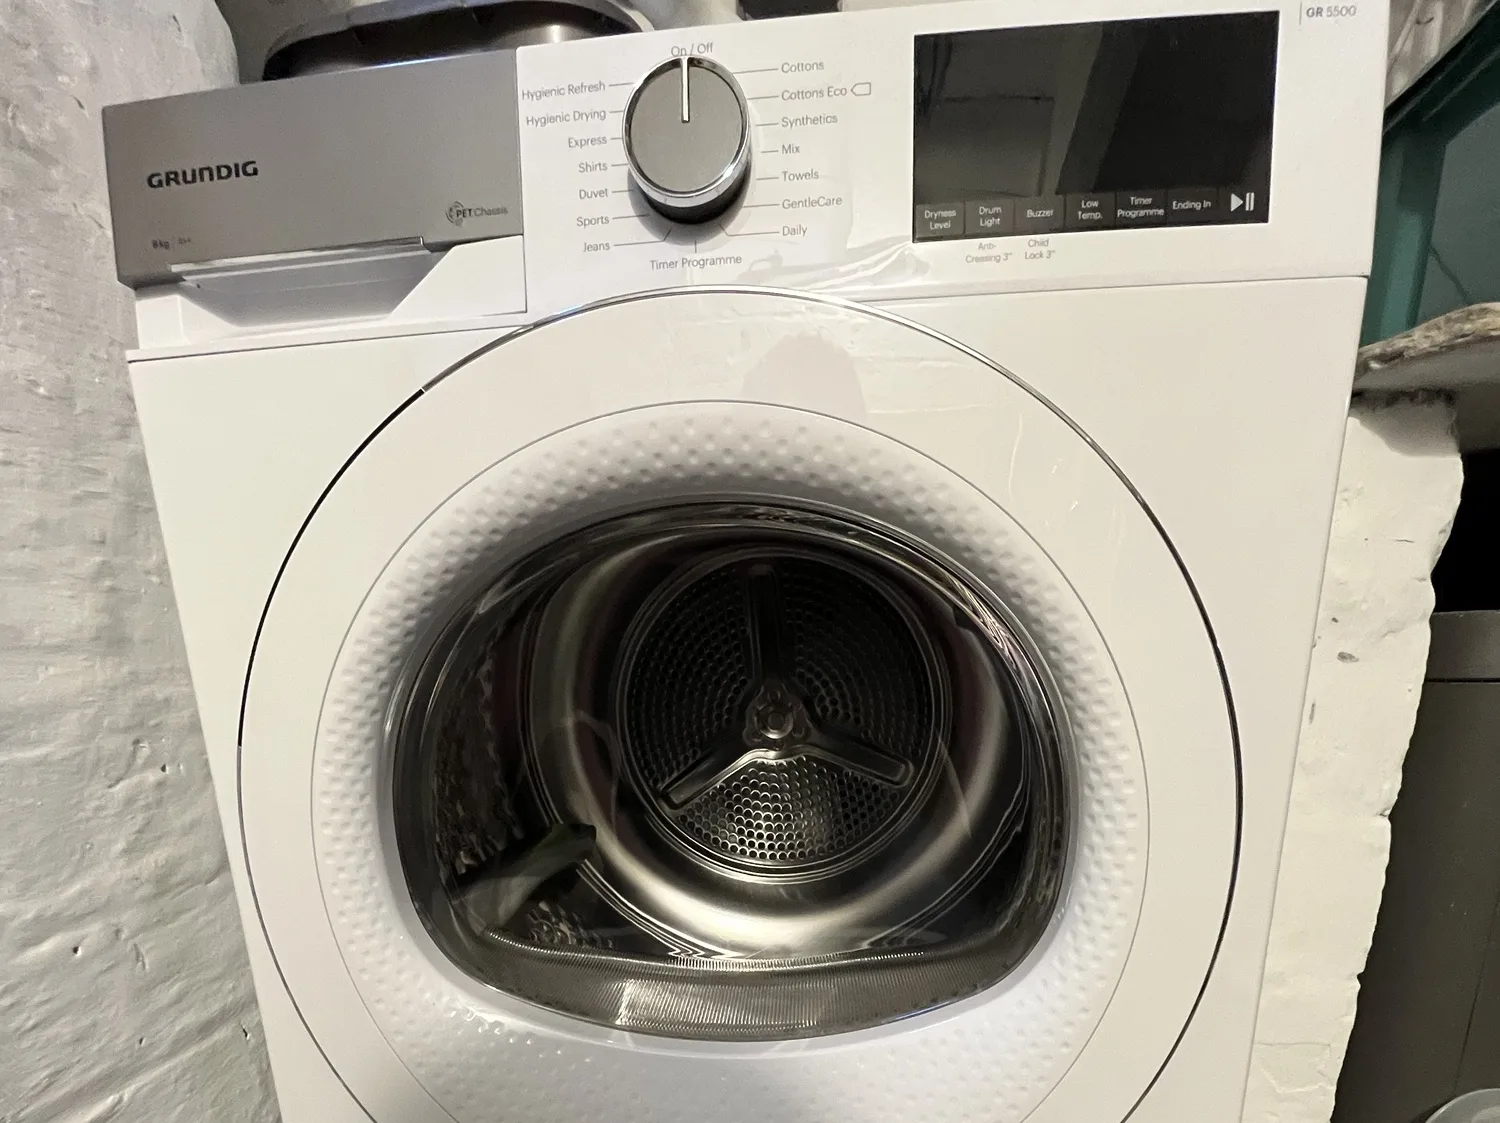 A photo of our tumble dryer that we use for drying our laundry.